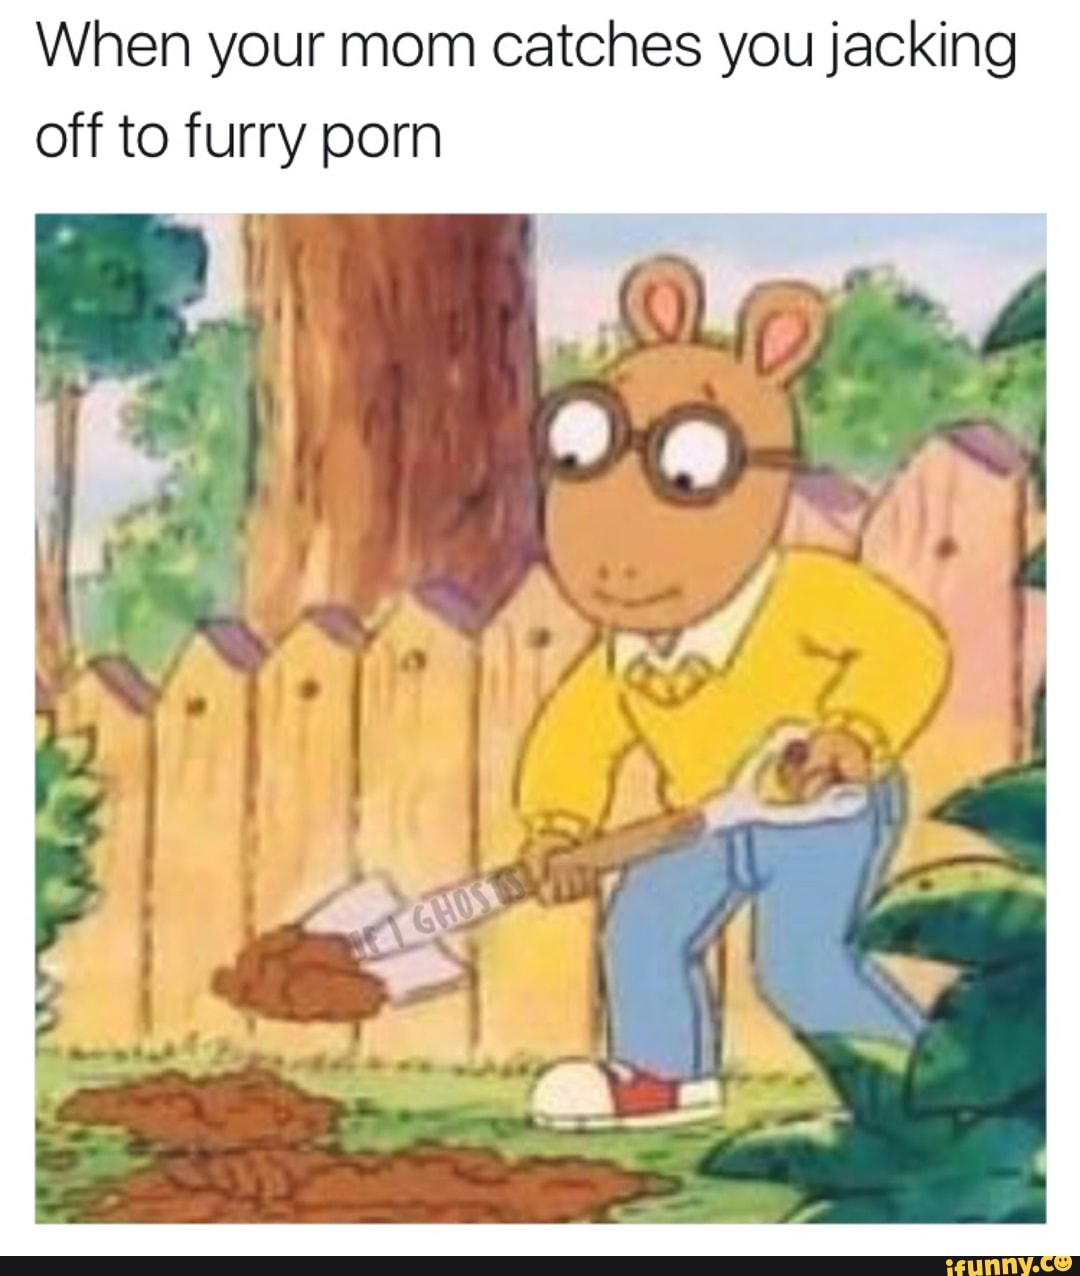 Mother Furry Cartoon Porn - When your mom catches you jacking off to furry porn - iFunny :)